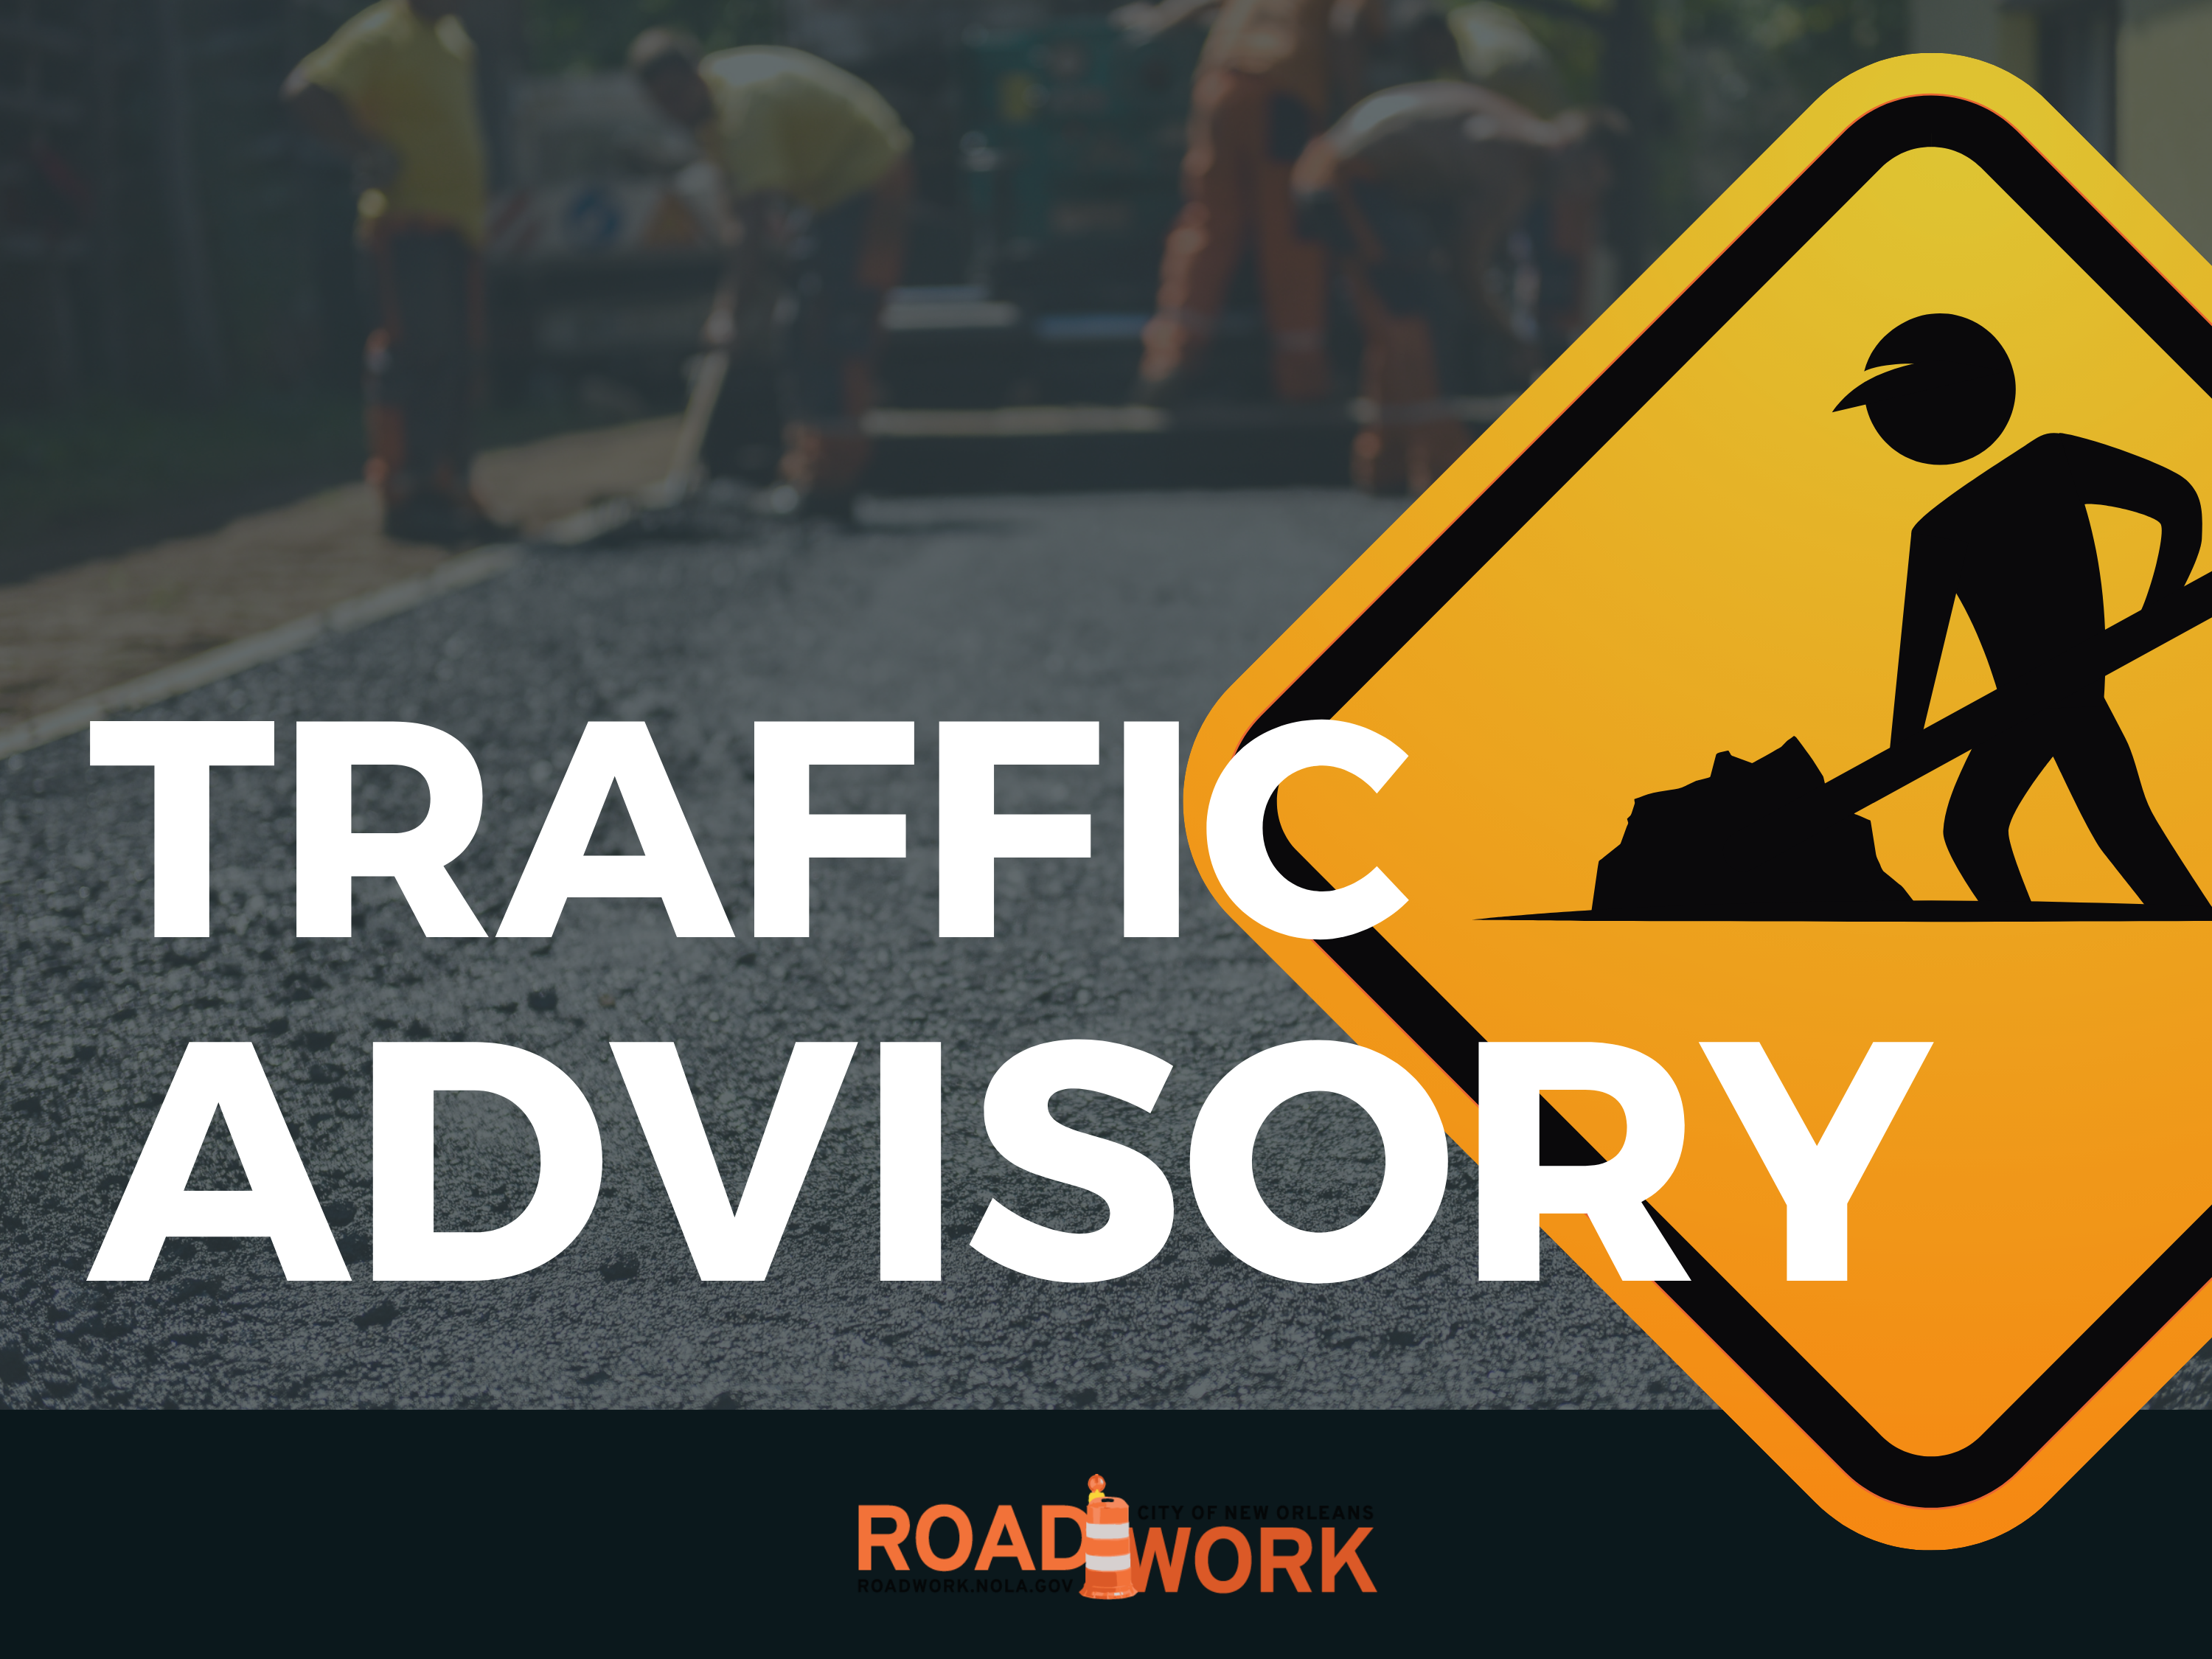 TRAFFIC ADVISORY: TEMPORARY ROAD CLOSURE ON NORTH ROCHEBLAVE BETWEEN DUMAINE STREET AND ST. PHILIP STREET